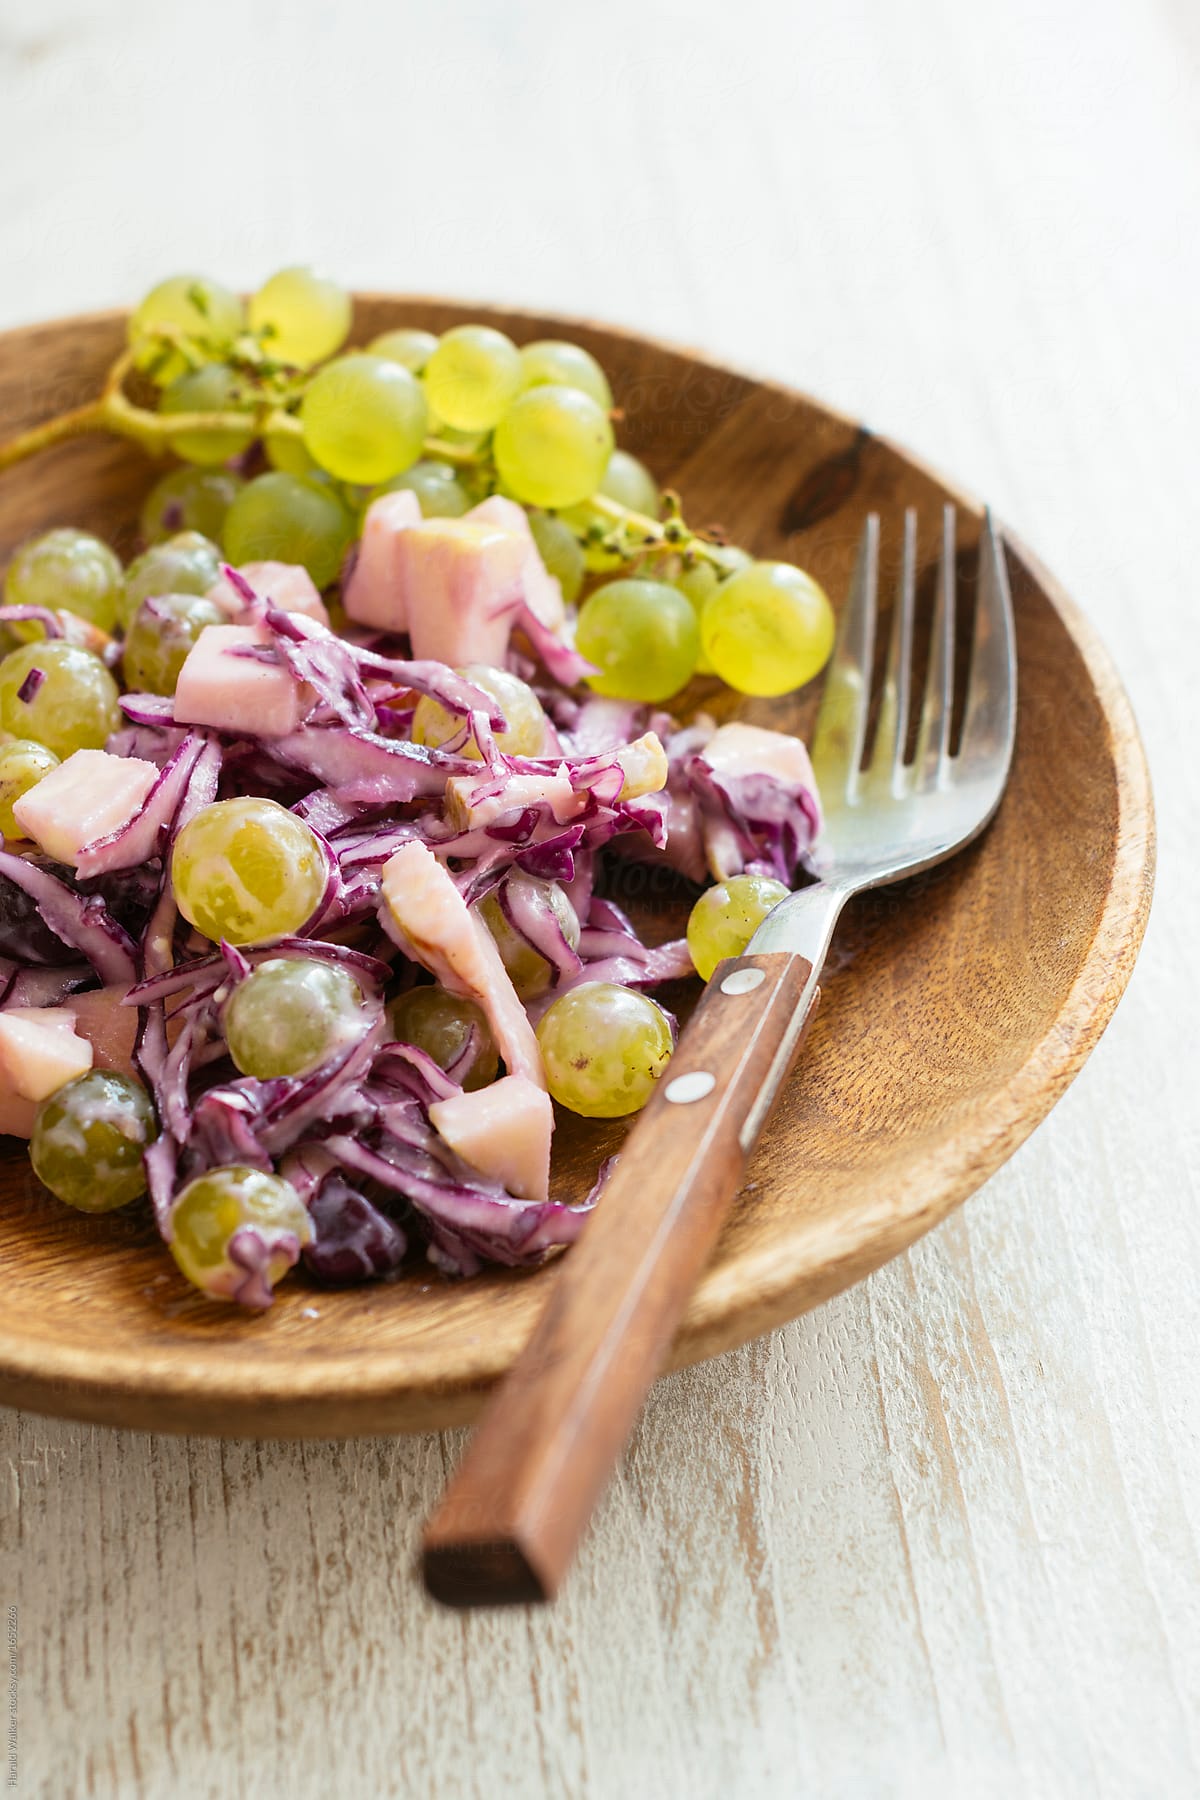 Red Cabbage Slaw with Grapes and Apples